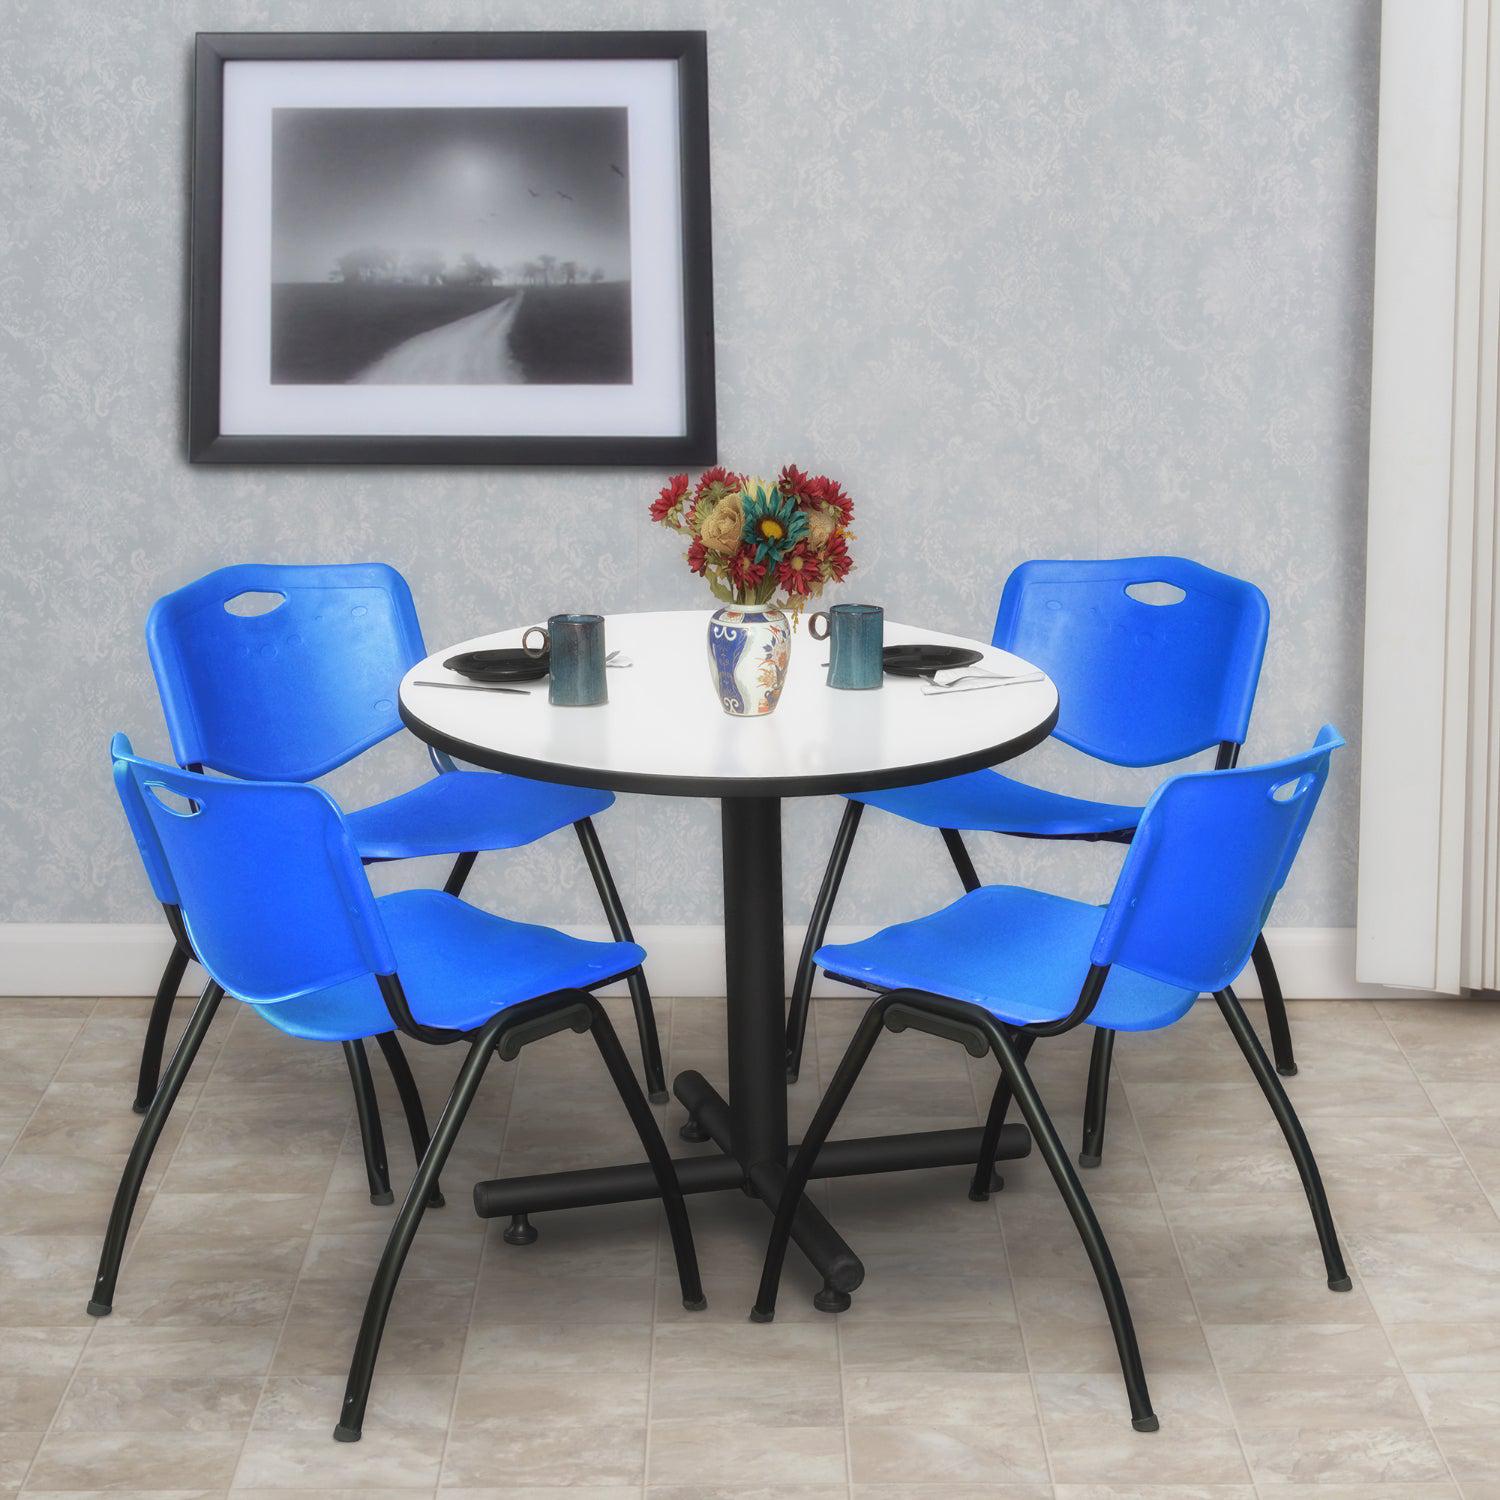 Kobe Round Breakroom Table and Chair Package, Kobe 30" Round X-Base Breakroom Table with 4 "M" Stack Chairs